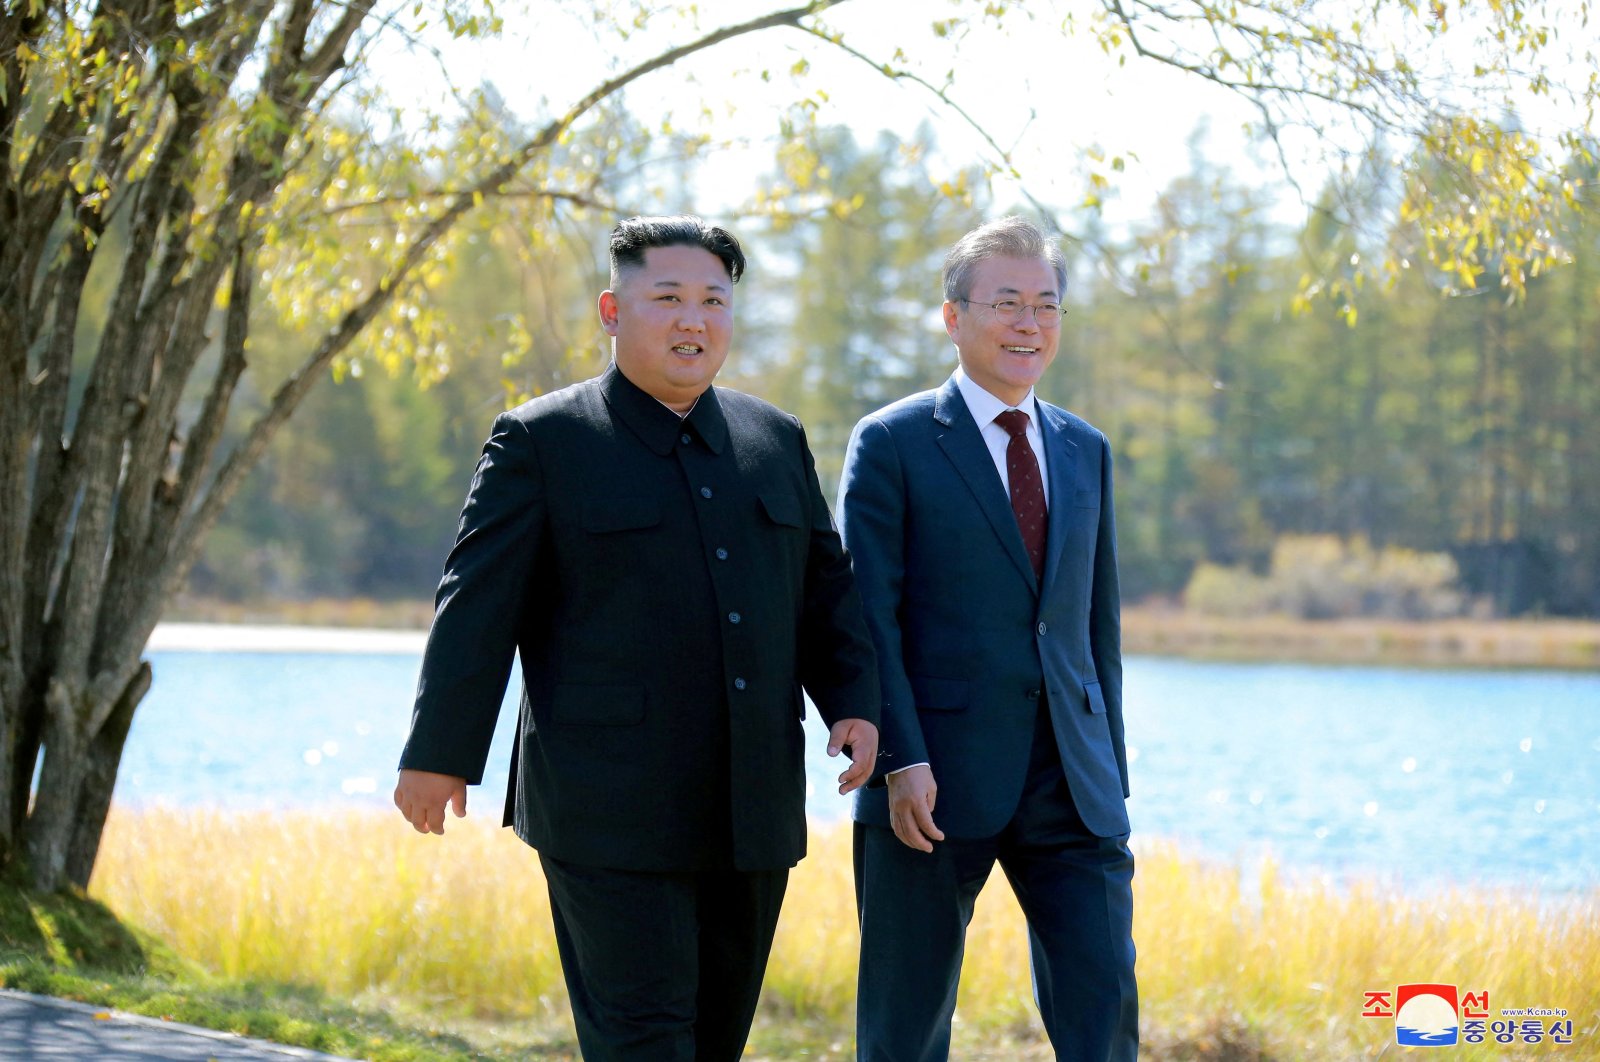 South Korean President Moon Jae-in (R) and North Korean leader Kim Jong Un walk during a luncheon, in this photo released by North Korea&#039;s Korean Central News Agency (KCNA) on Sept. 21, 2018. (KCNA via Reuters)